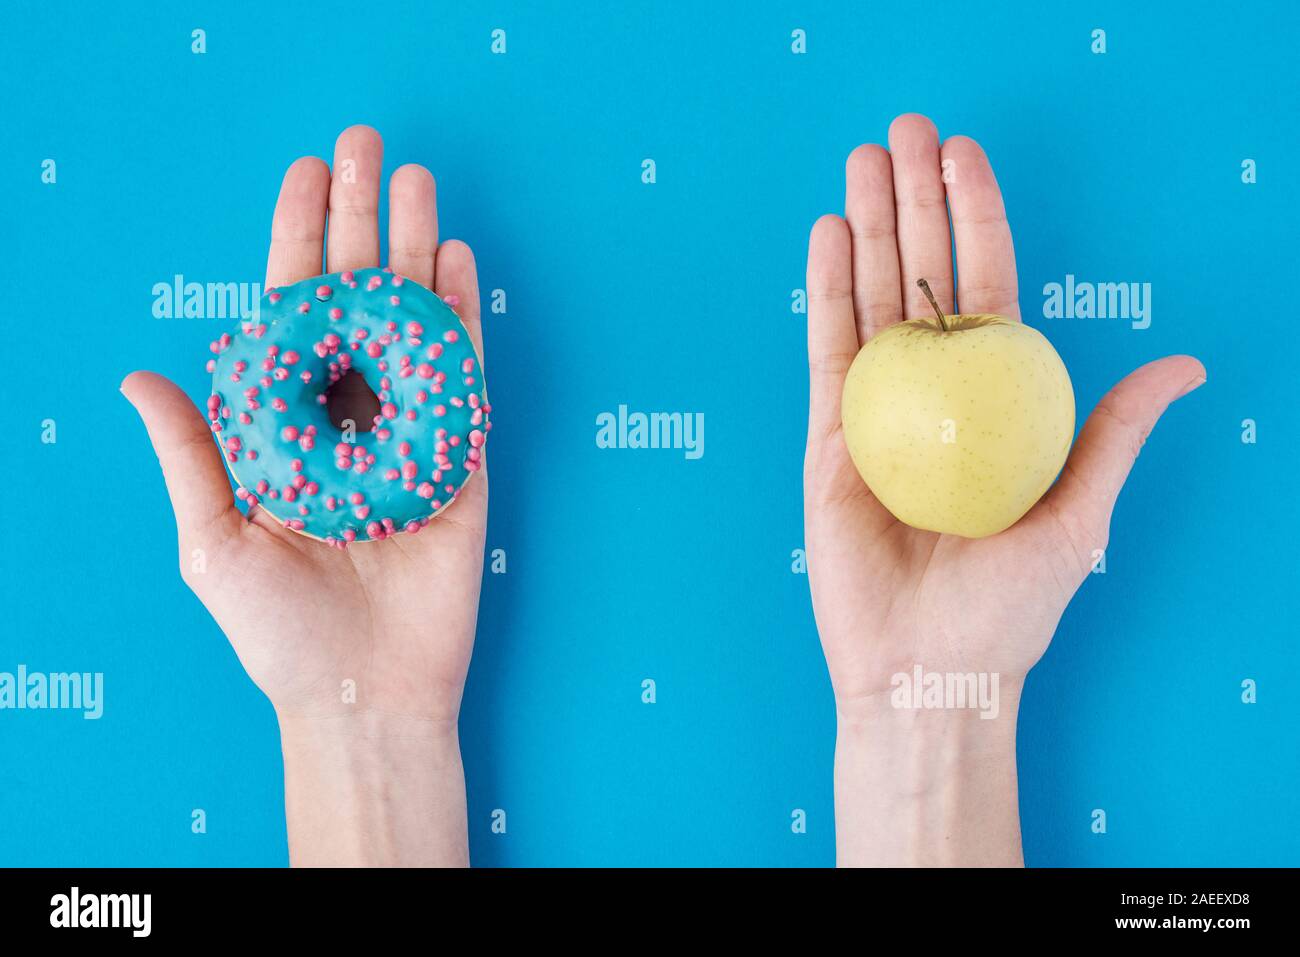 Woman choosing betwen apple and donut in her hands. Healthy food concept. Stock Photo